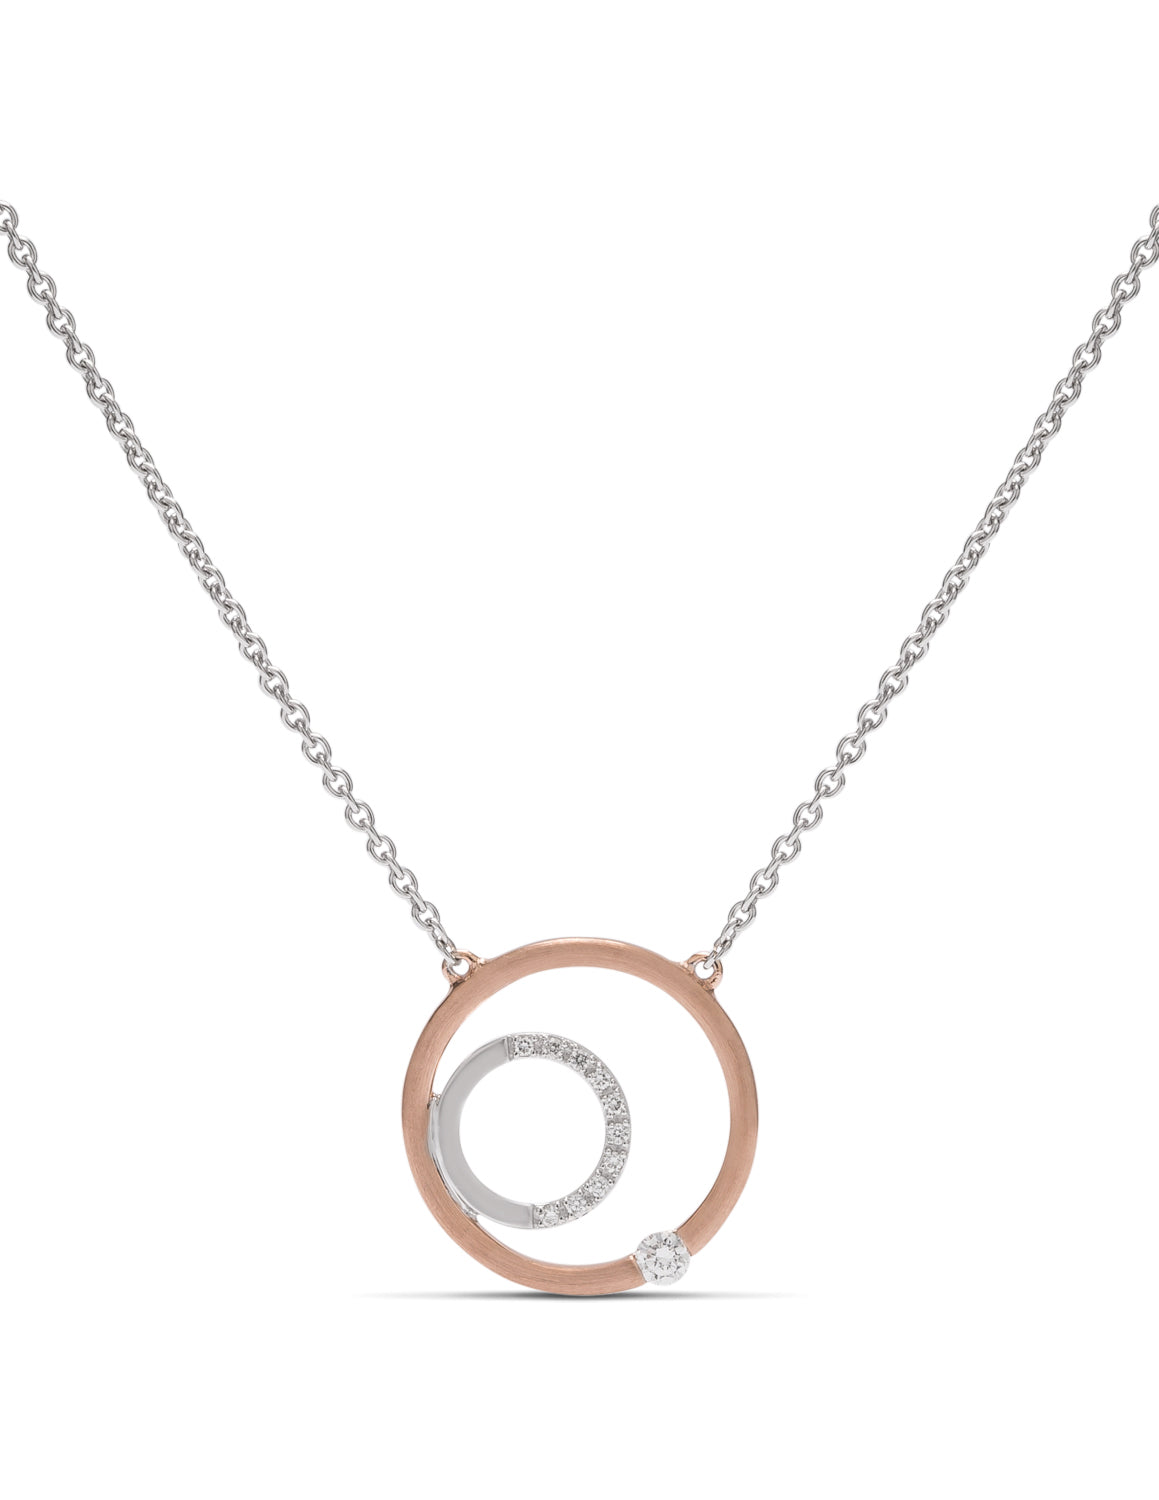 Two-Tone Double Circle Necklace - Charles Koll Jewellers